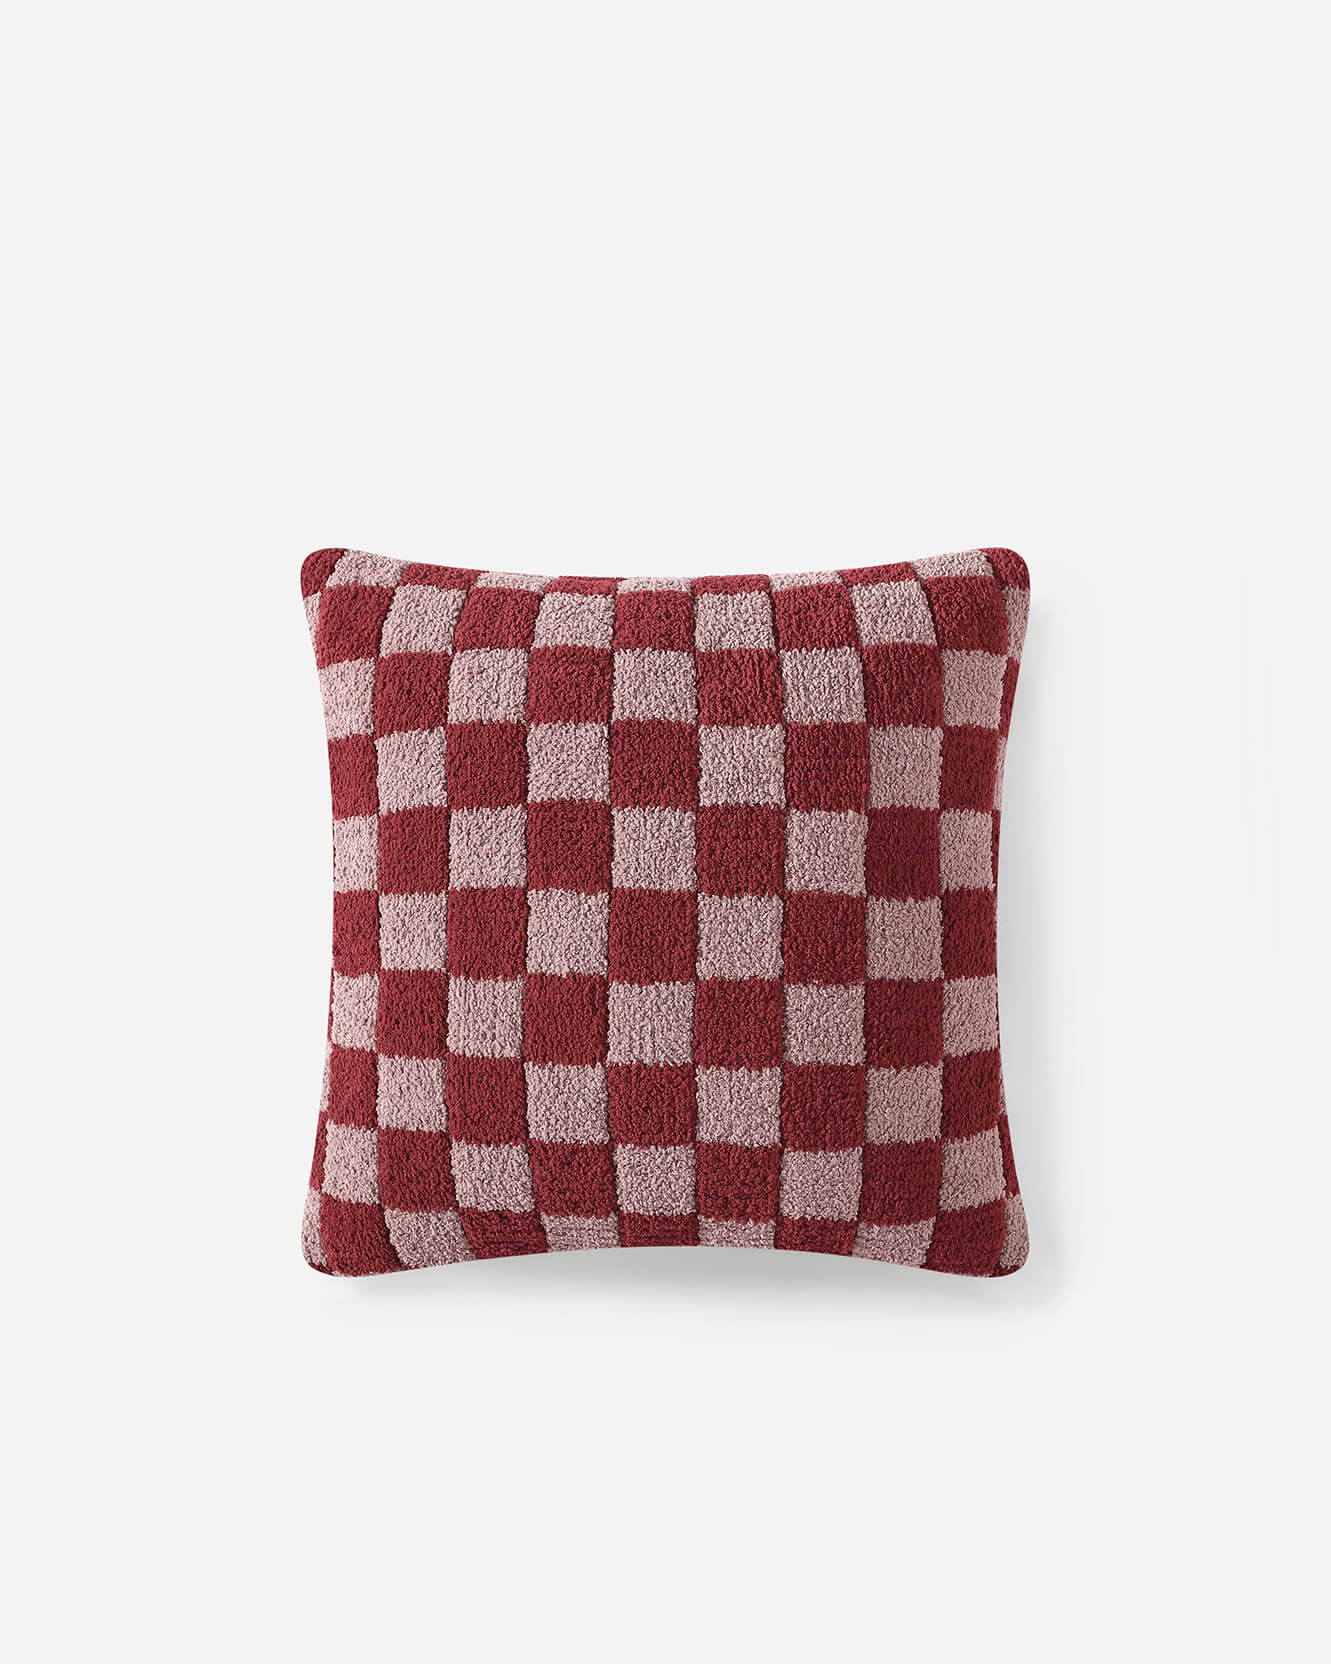 Vibrant red checkered pillow, adding a pop of color to bedroom decor.